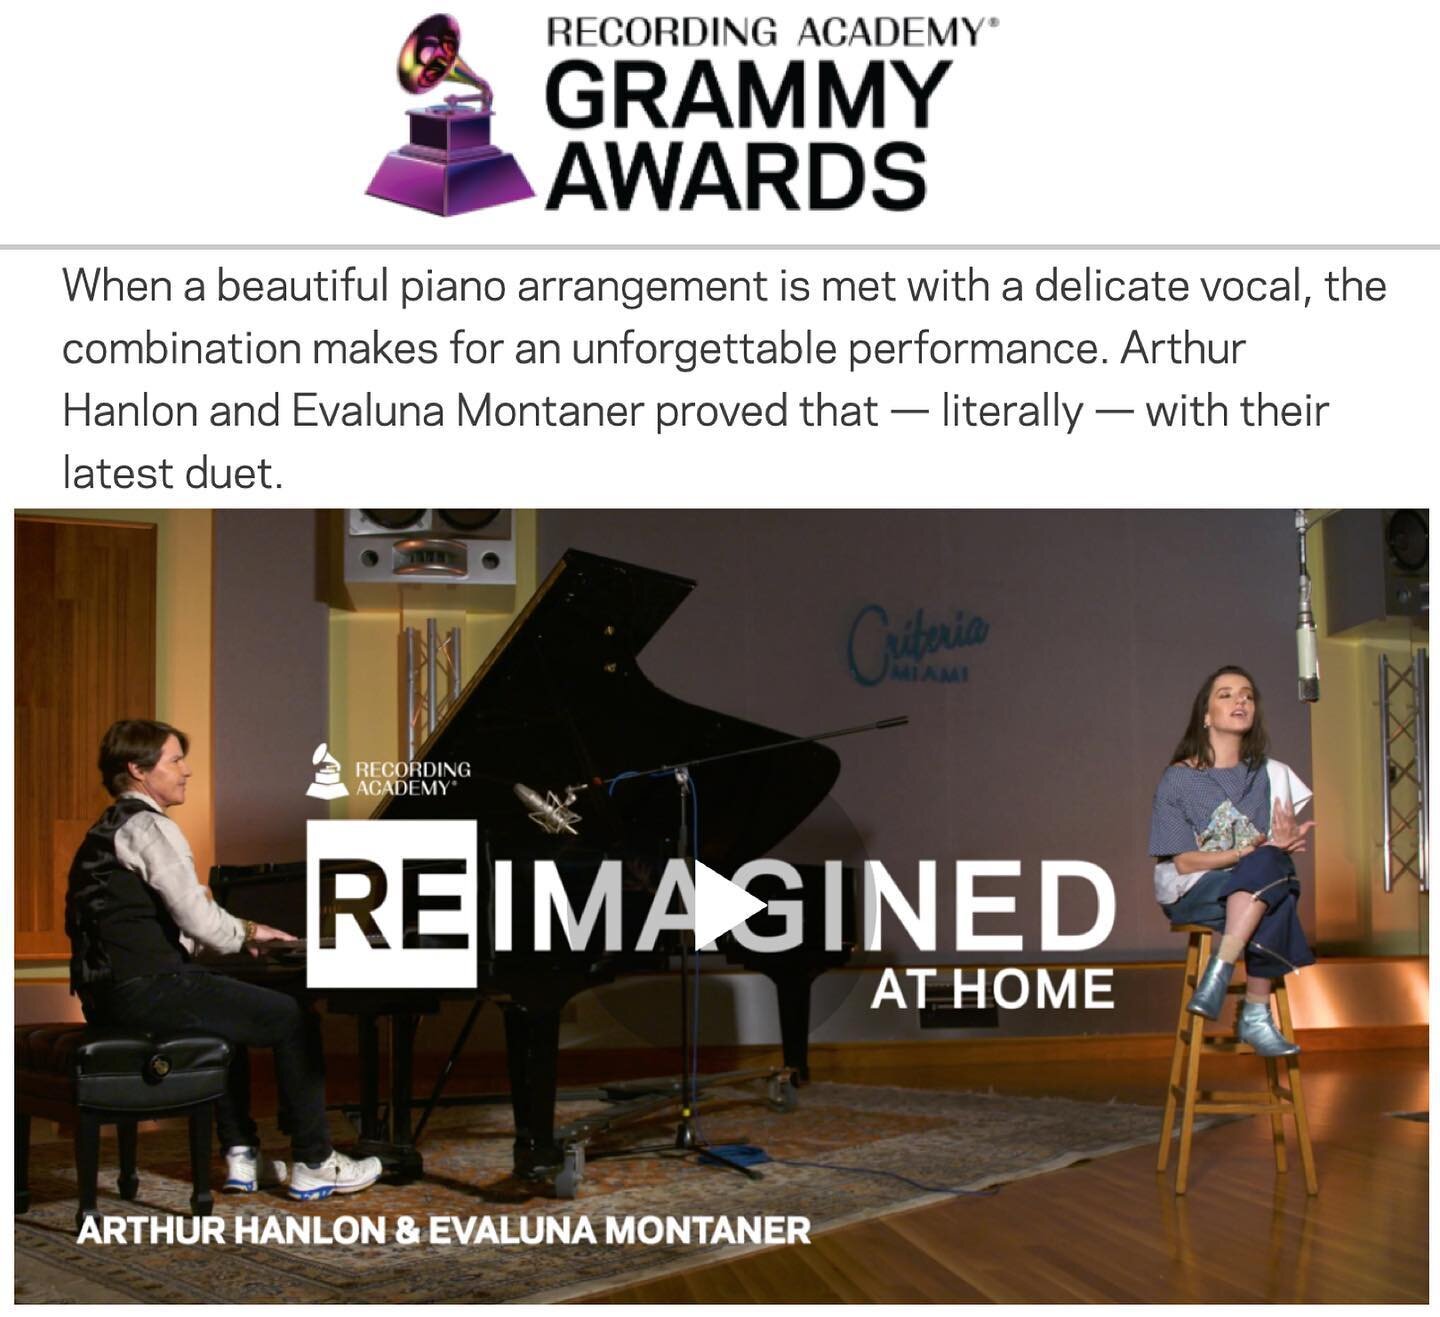 &ldquo;When a beautiful piano arrangement is met with a delicate vocal, the combination makes for an unforgettable performance,&rdquo; reports @recordingacademy. &ldquo;@arthurhanlon and @evaluna proved that &mdash; literally &mdash; with their lates